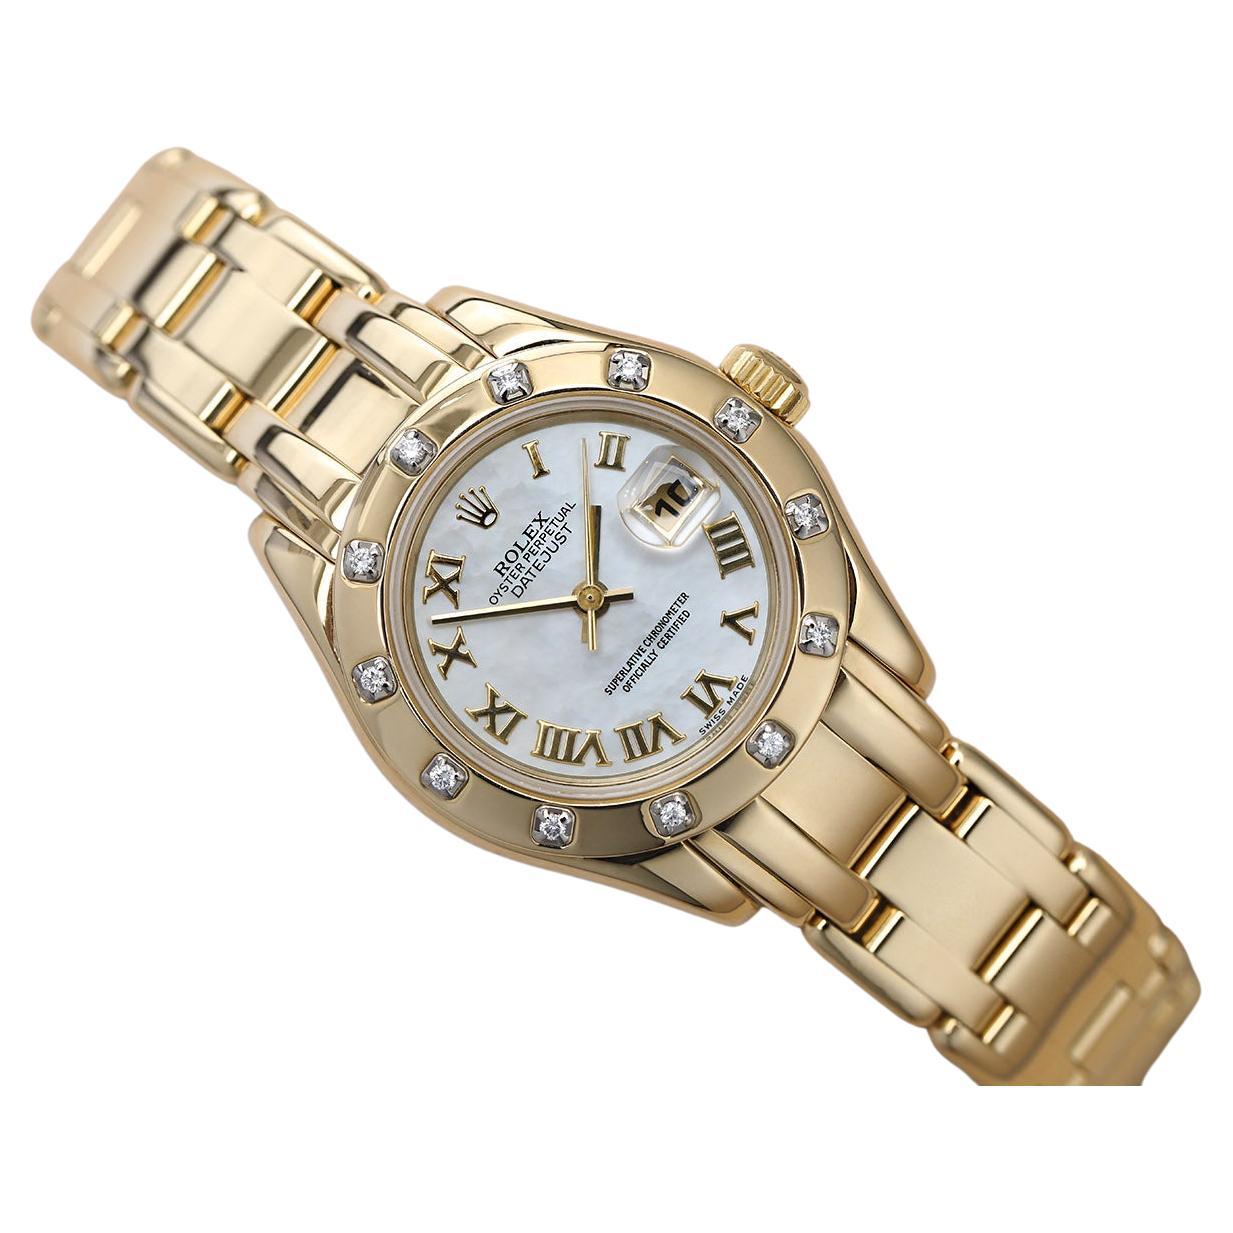 Rolex Pearlmaster 18k Yellow Gold Watch with White Mother of Pearl 80318 For Sale